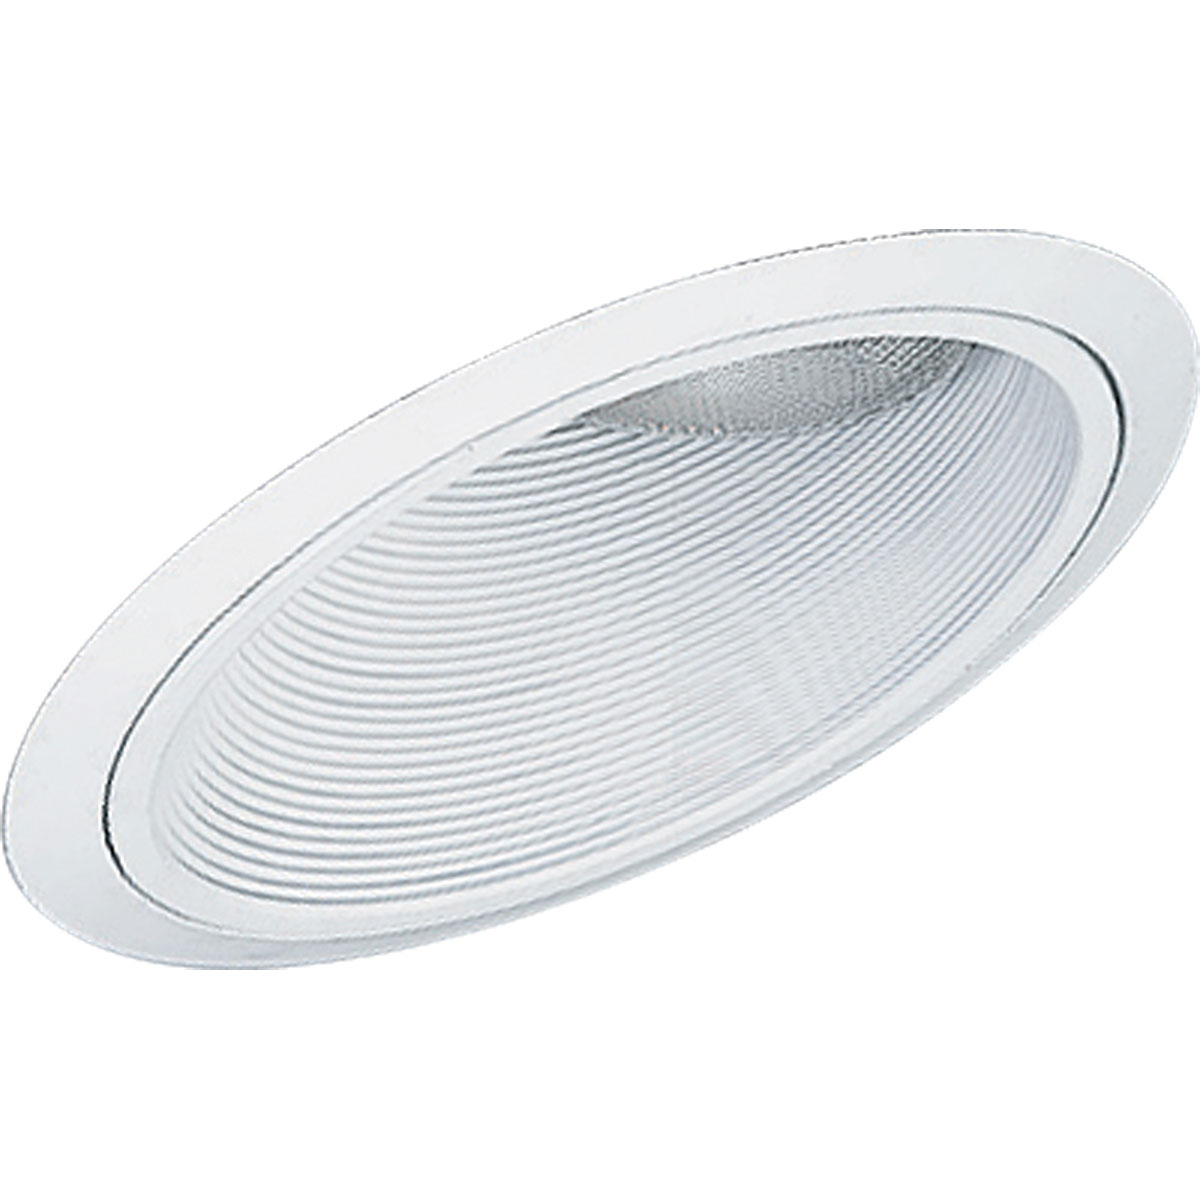 Sloped ceiling baffle for insulated ceilings in a White finish and bright white powder painted steel flange and ball.